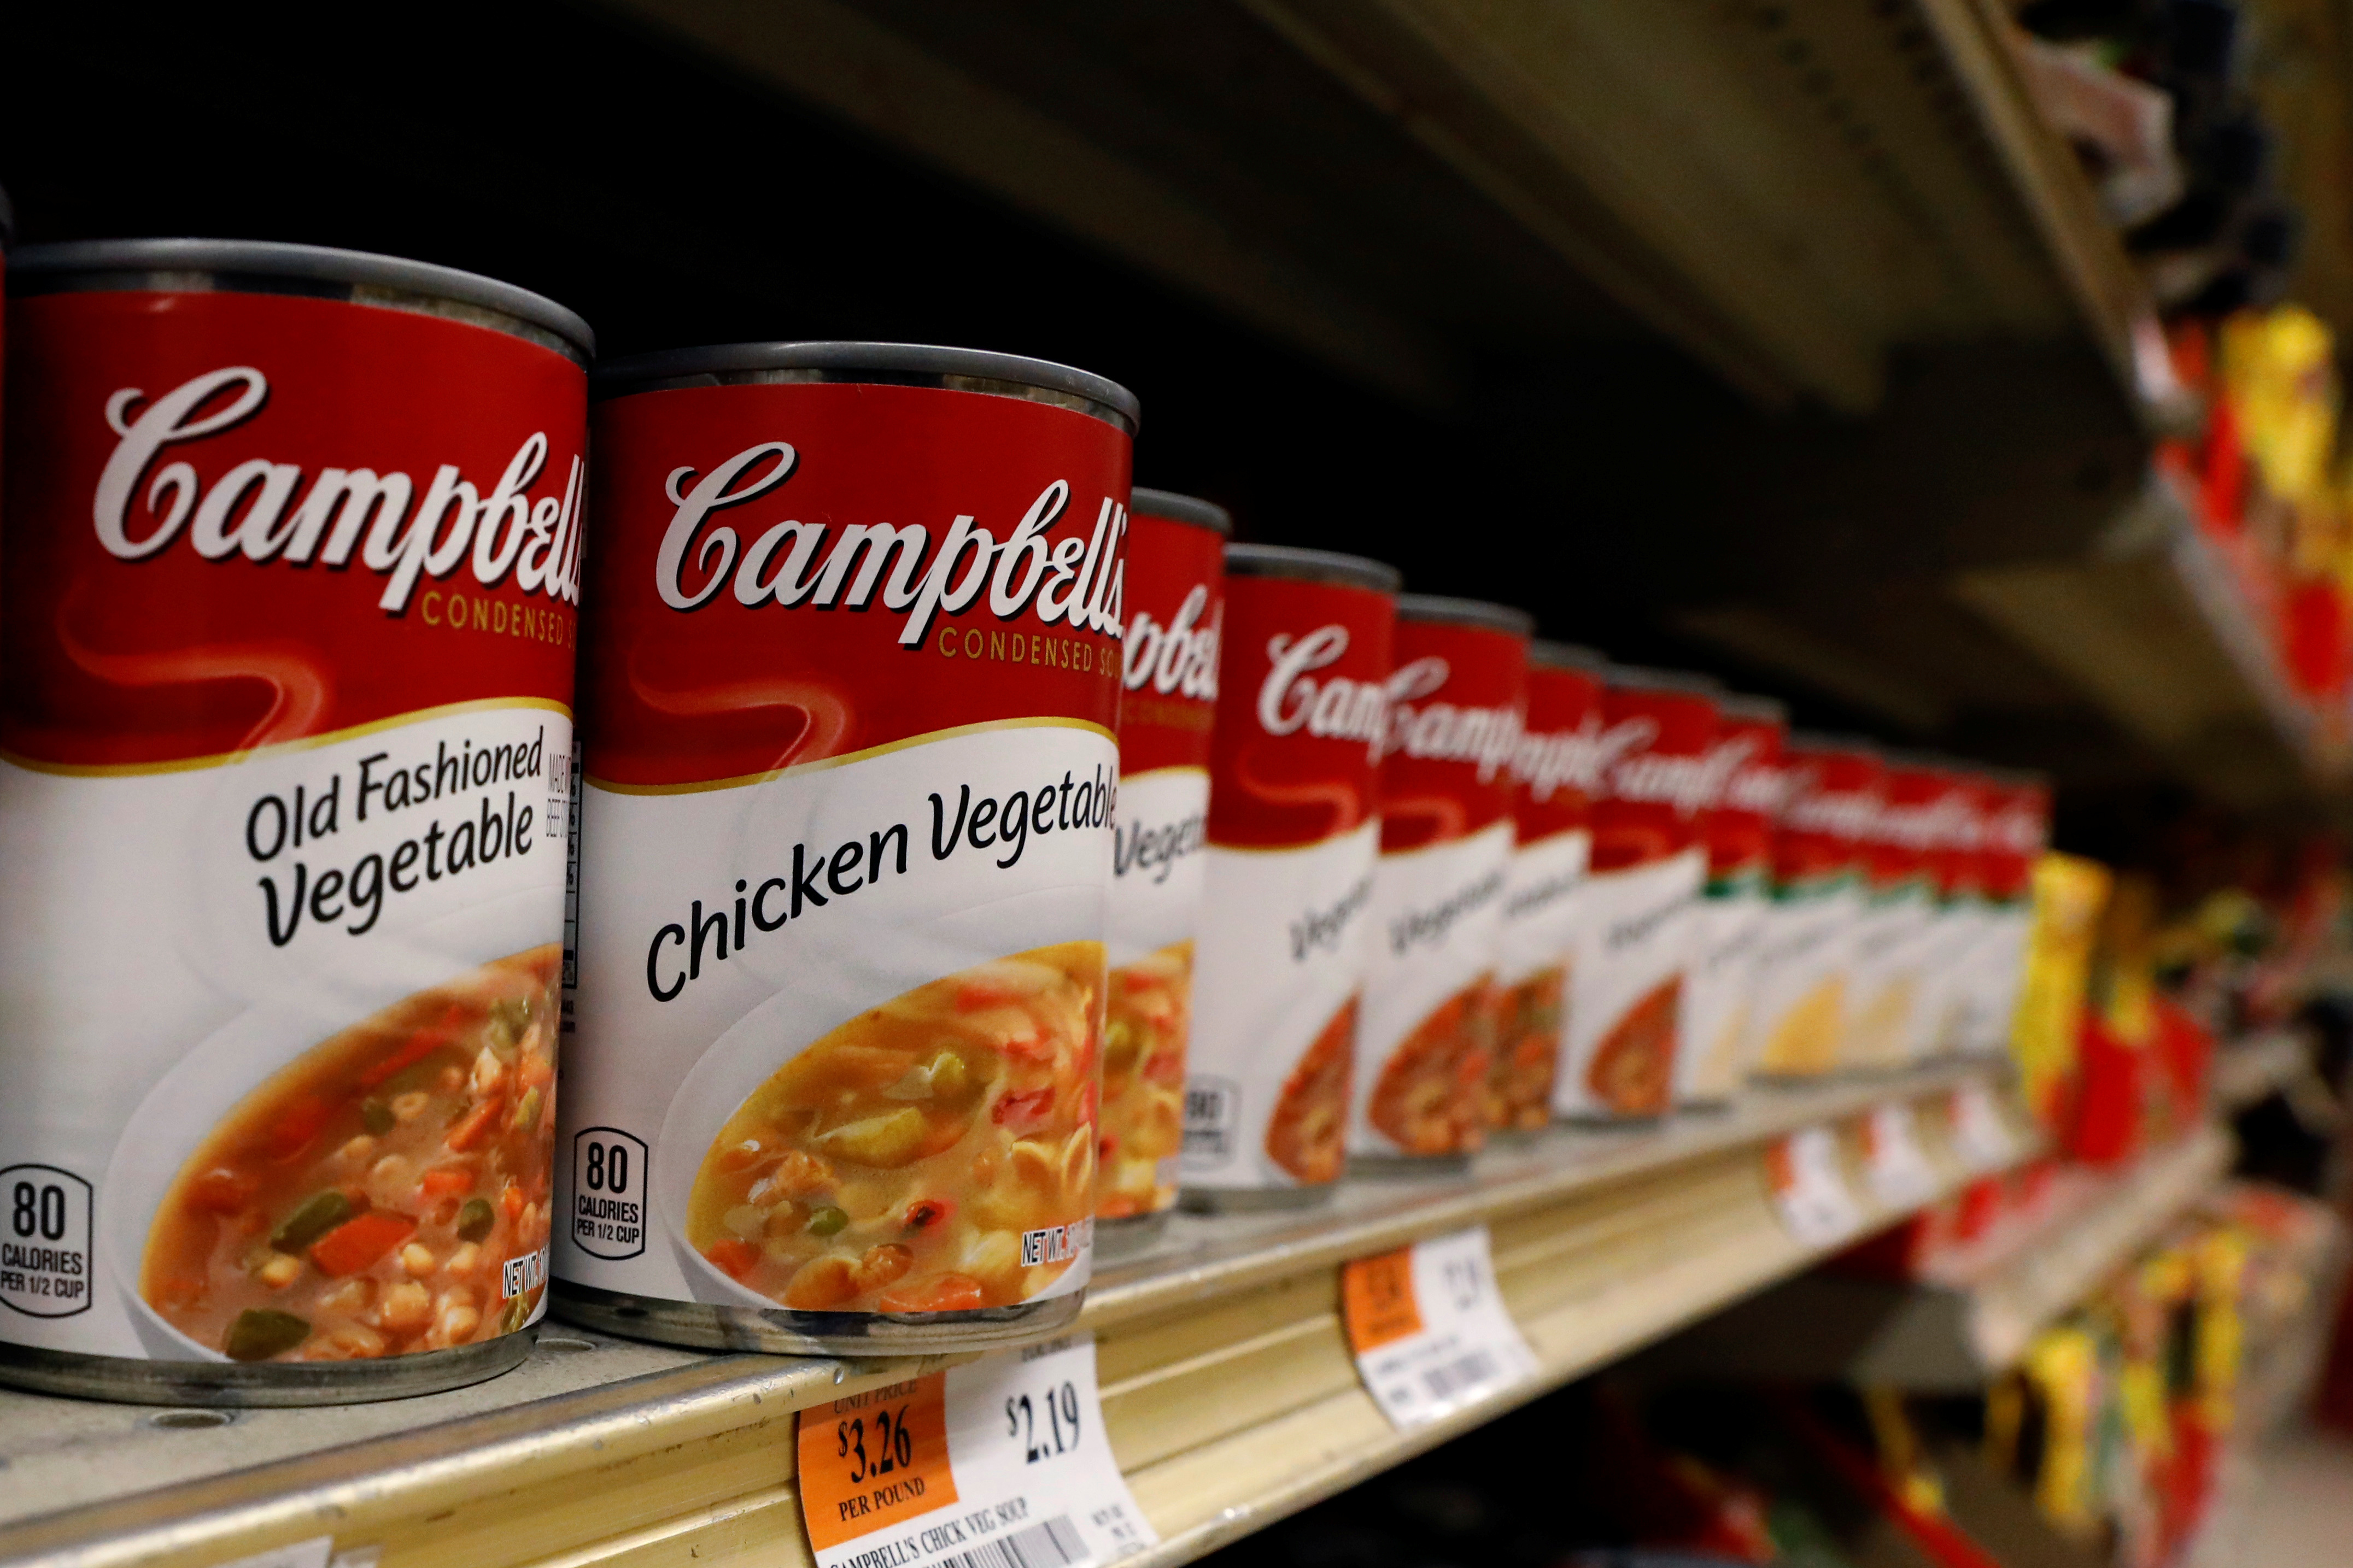 Cans of Campbell's Soup are displayed in a supermarket in New York